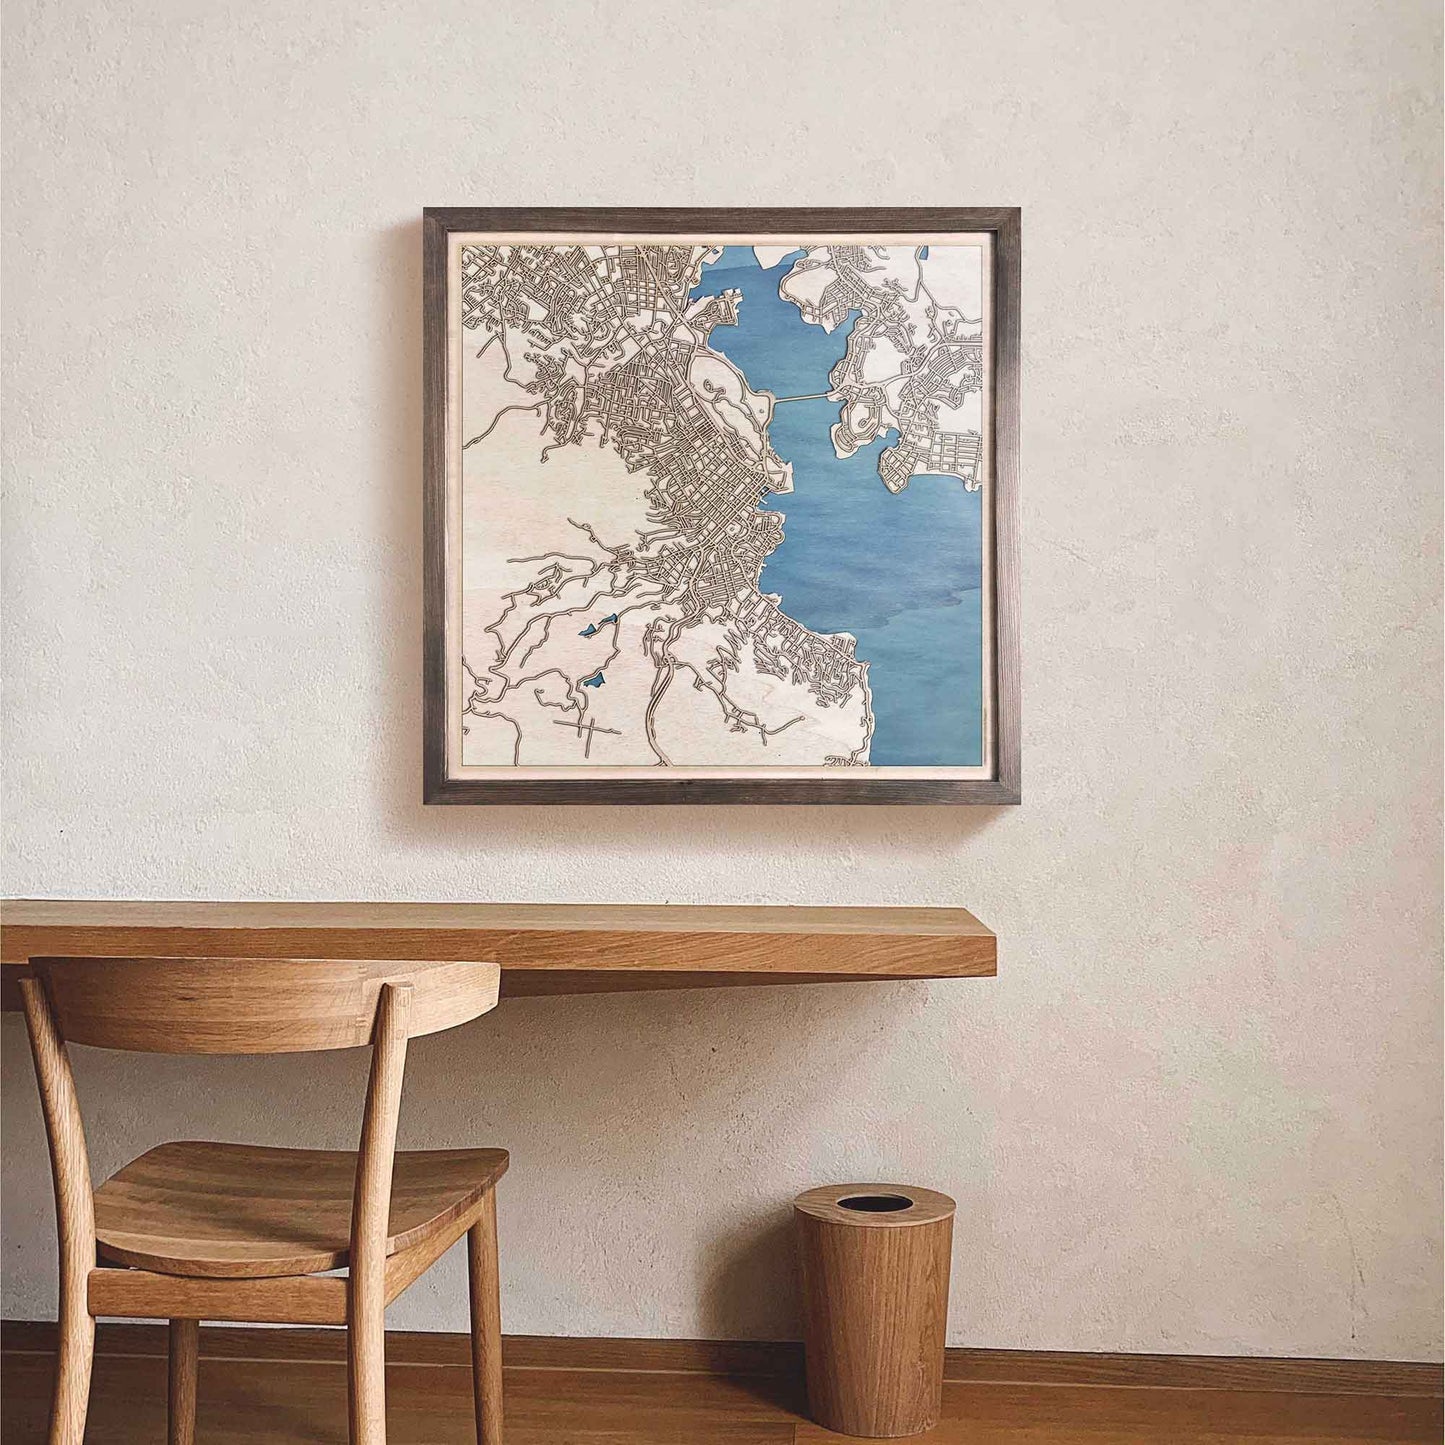 Hobart Wooden Map by CityWood - Custom Wood Map Art - Unique Laser Cut Engraved - Anniversary Gift